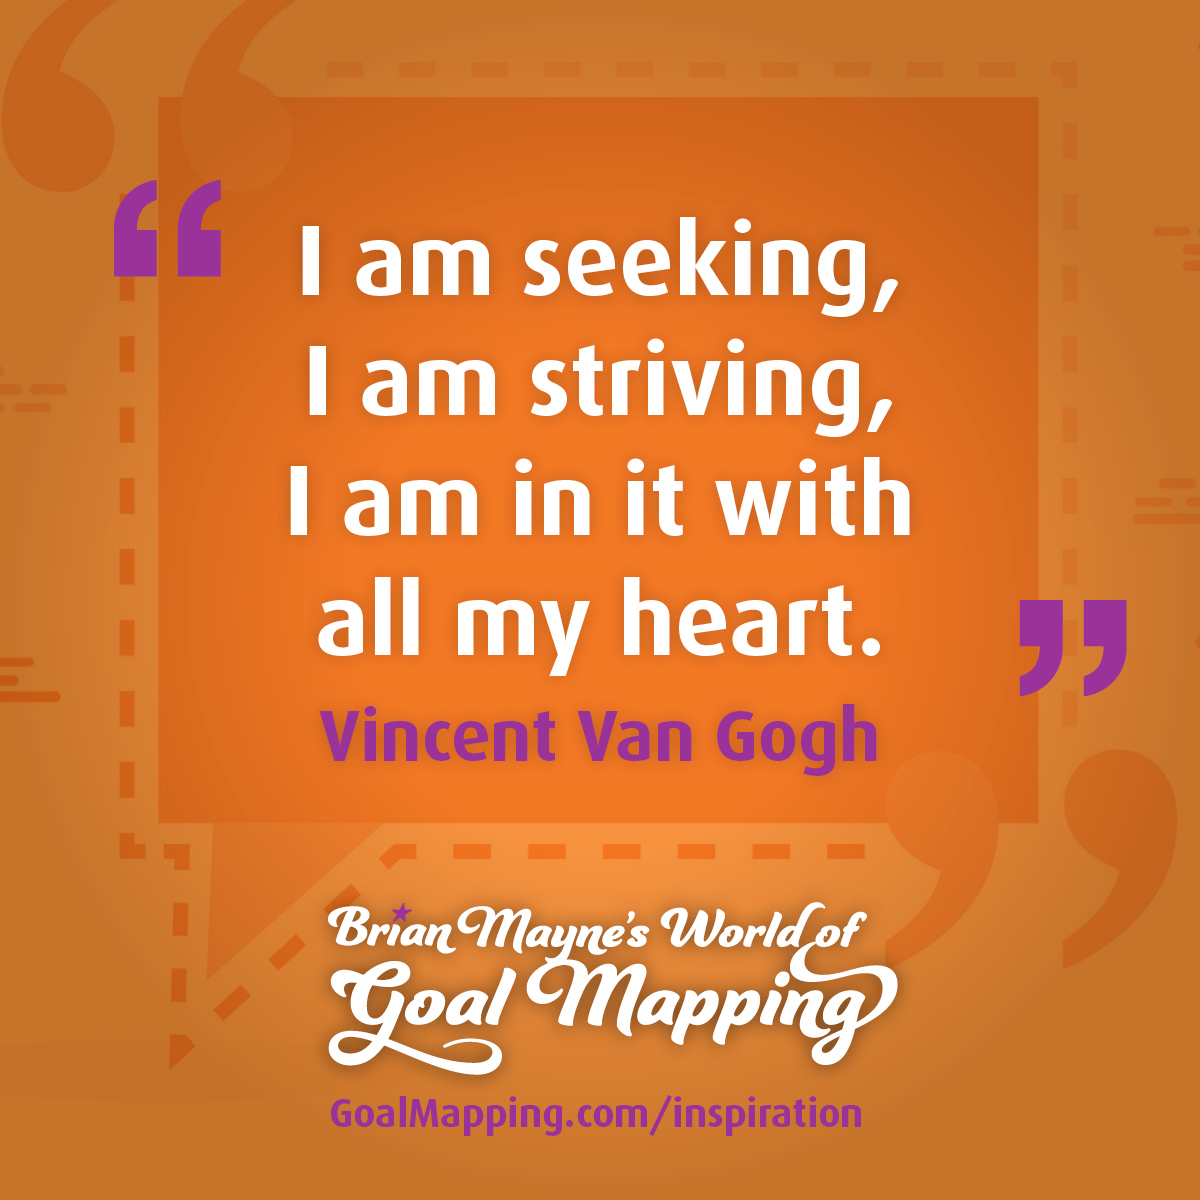 "I am seeking, I am striving, I am in it with all my heart." Vincent Van Gogh